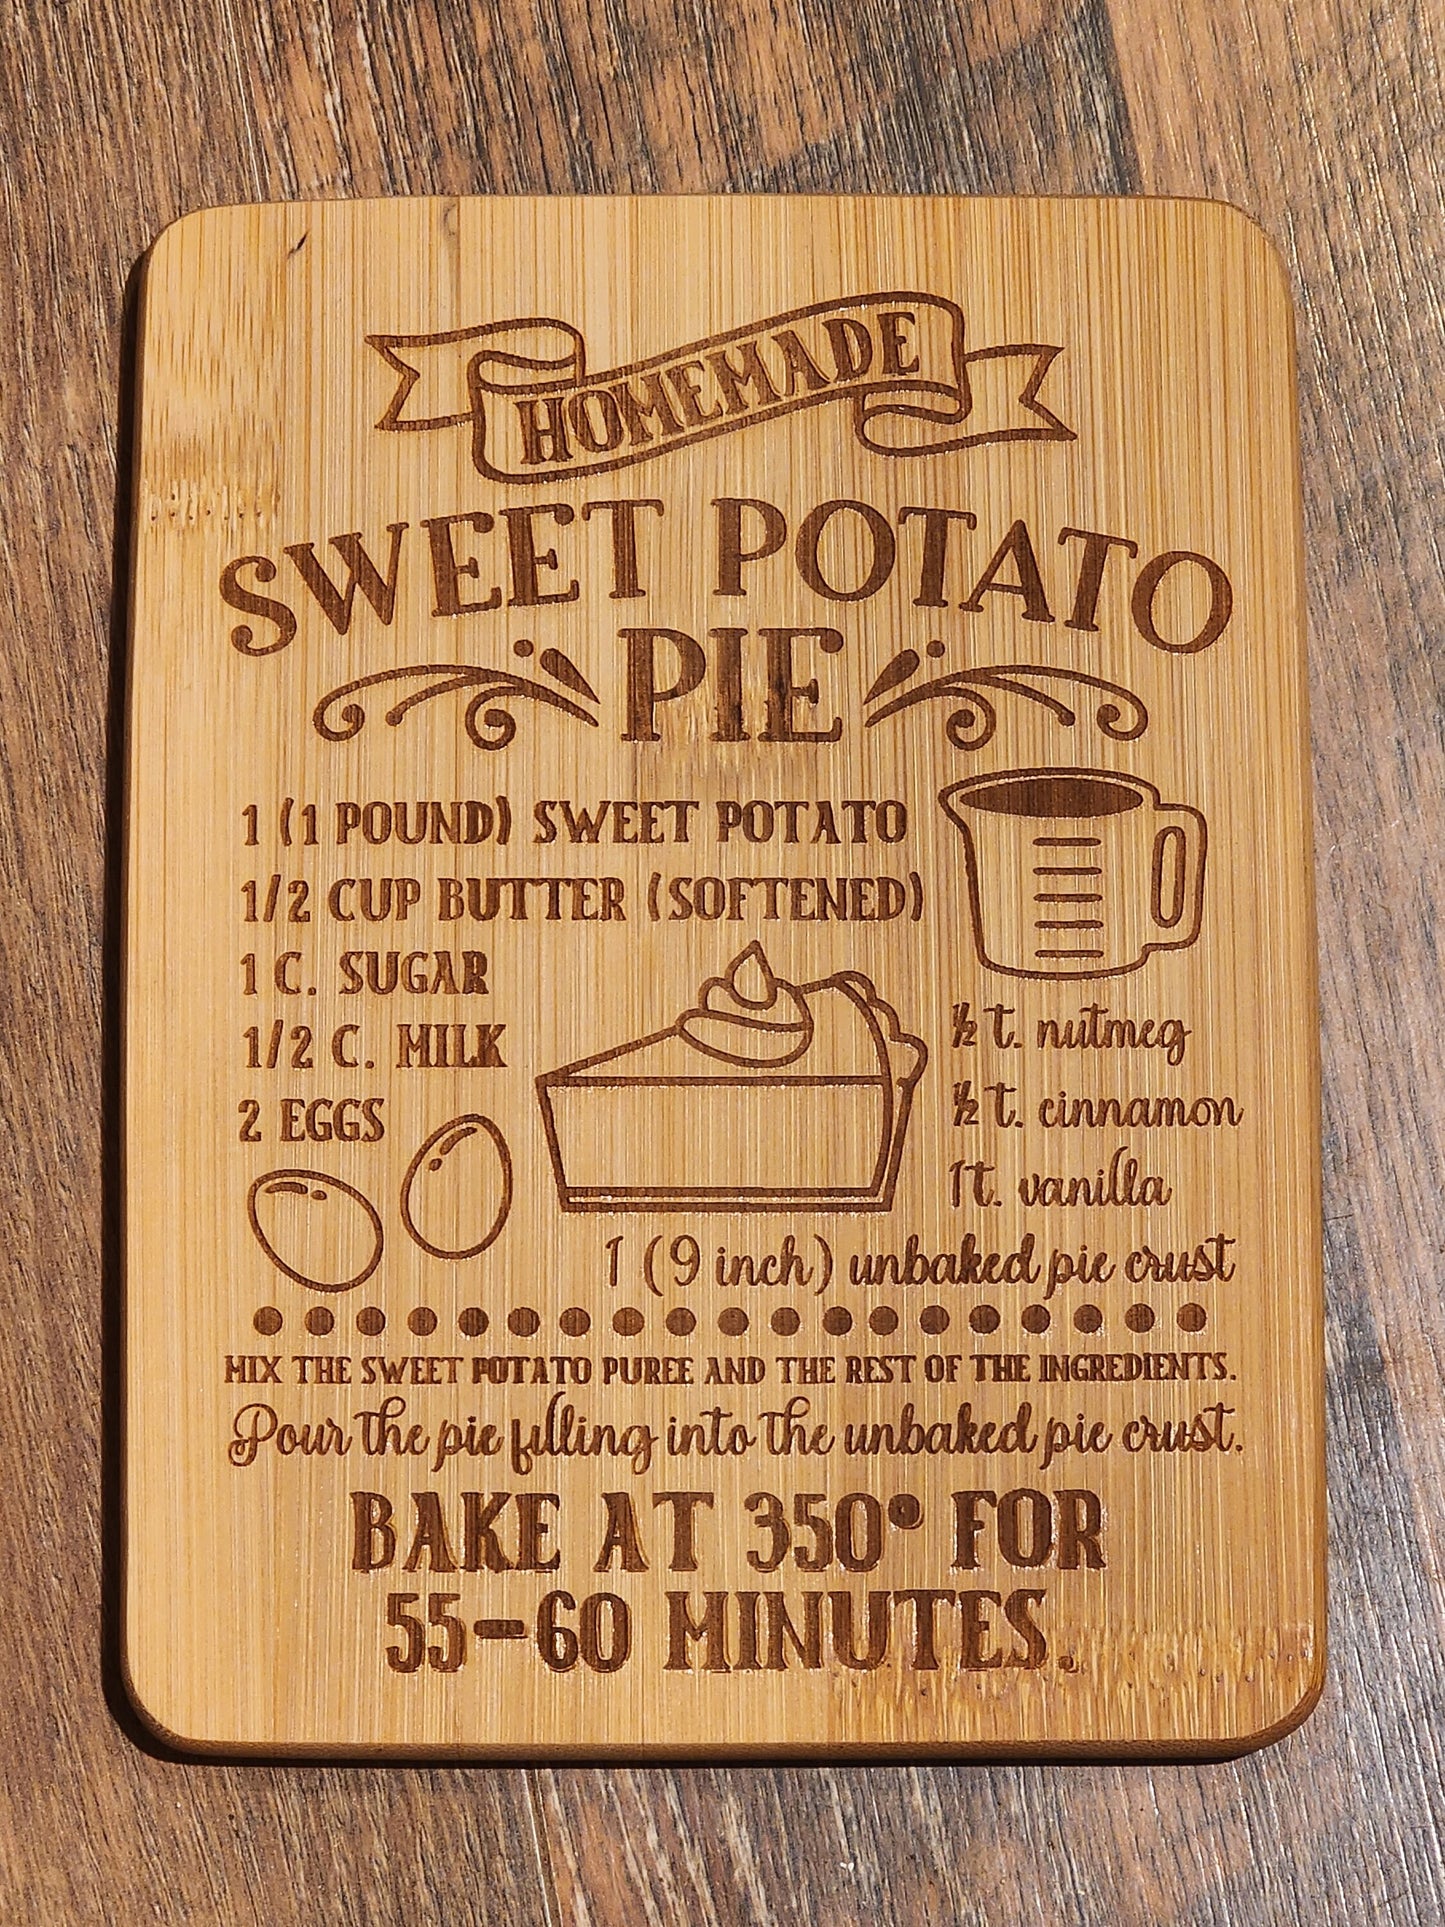 Sweet potato Pie Recipe, country etched Bamboo Wood Cutting Board  - 8.75 x 6.875 inches